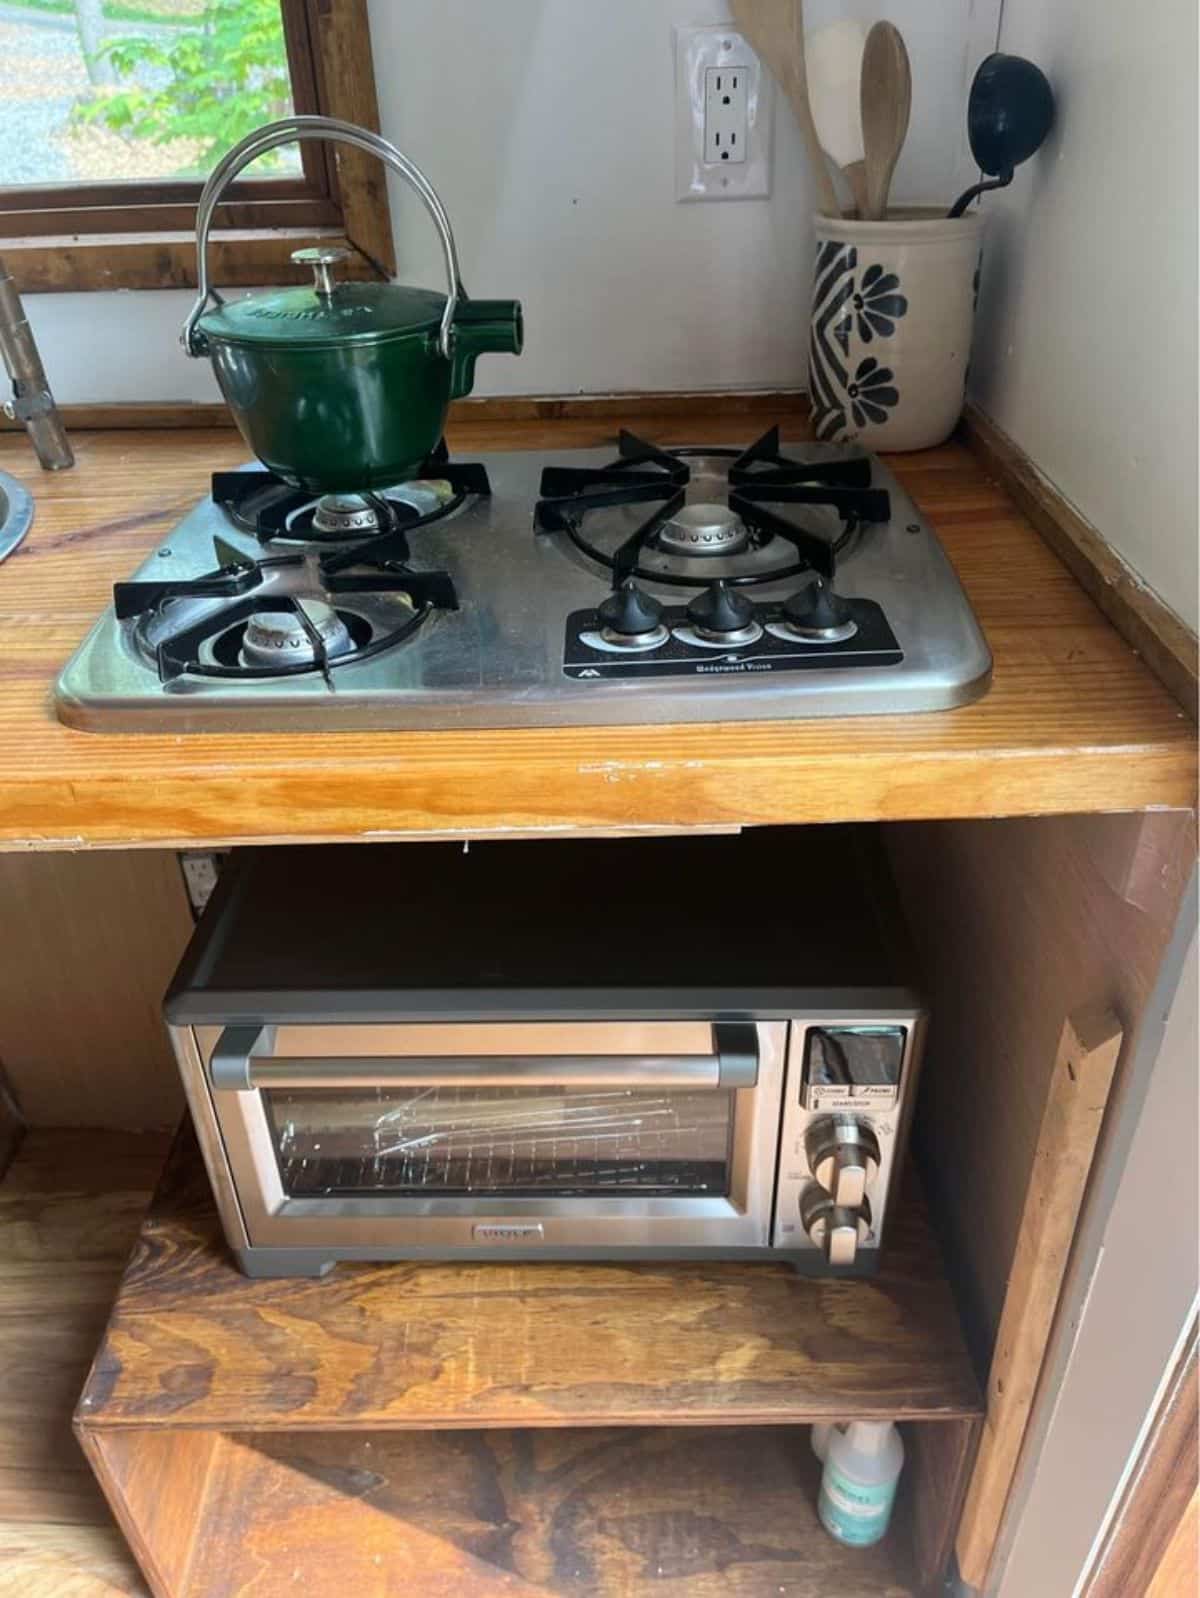 downsized appliances in kitchen area of fully insulated tiny home